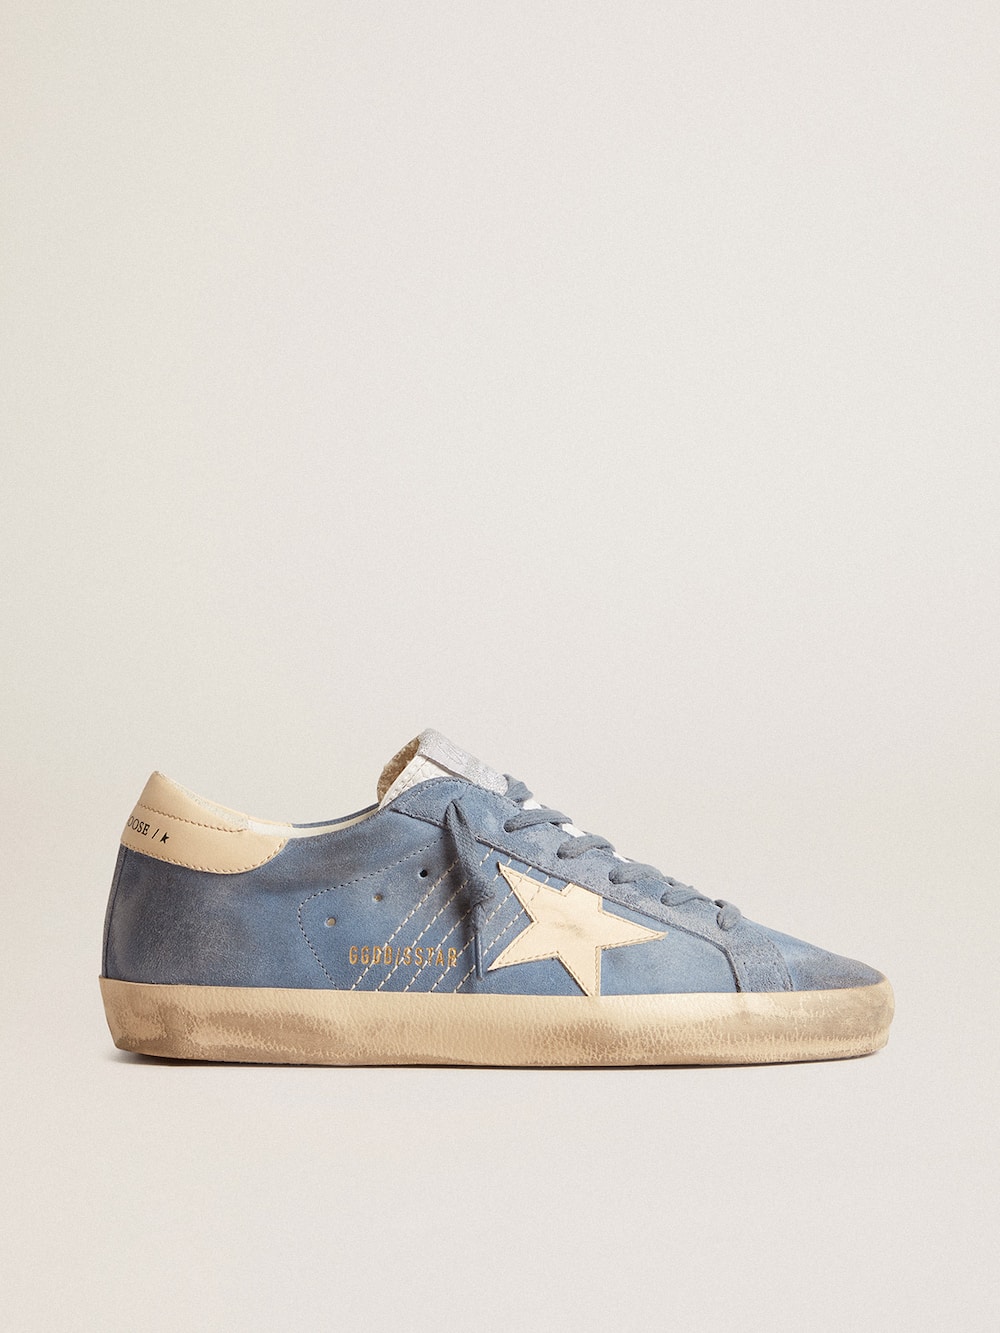 Golden Goose - Super-Star in light blue suede with beige leather star and heel tab in 